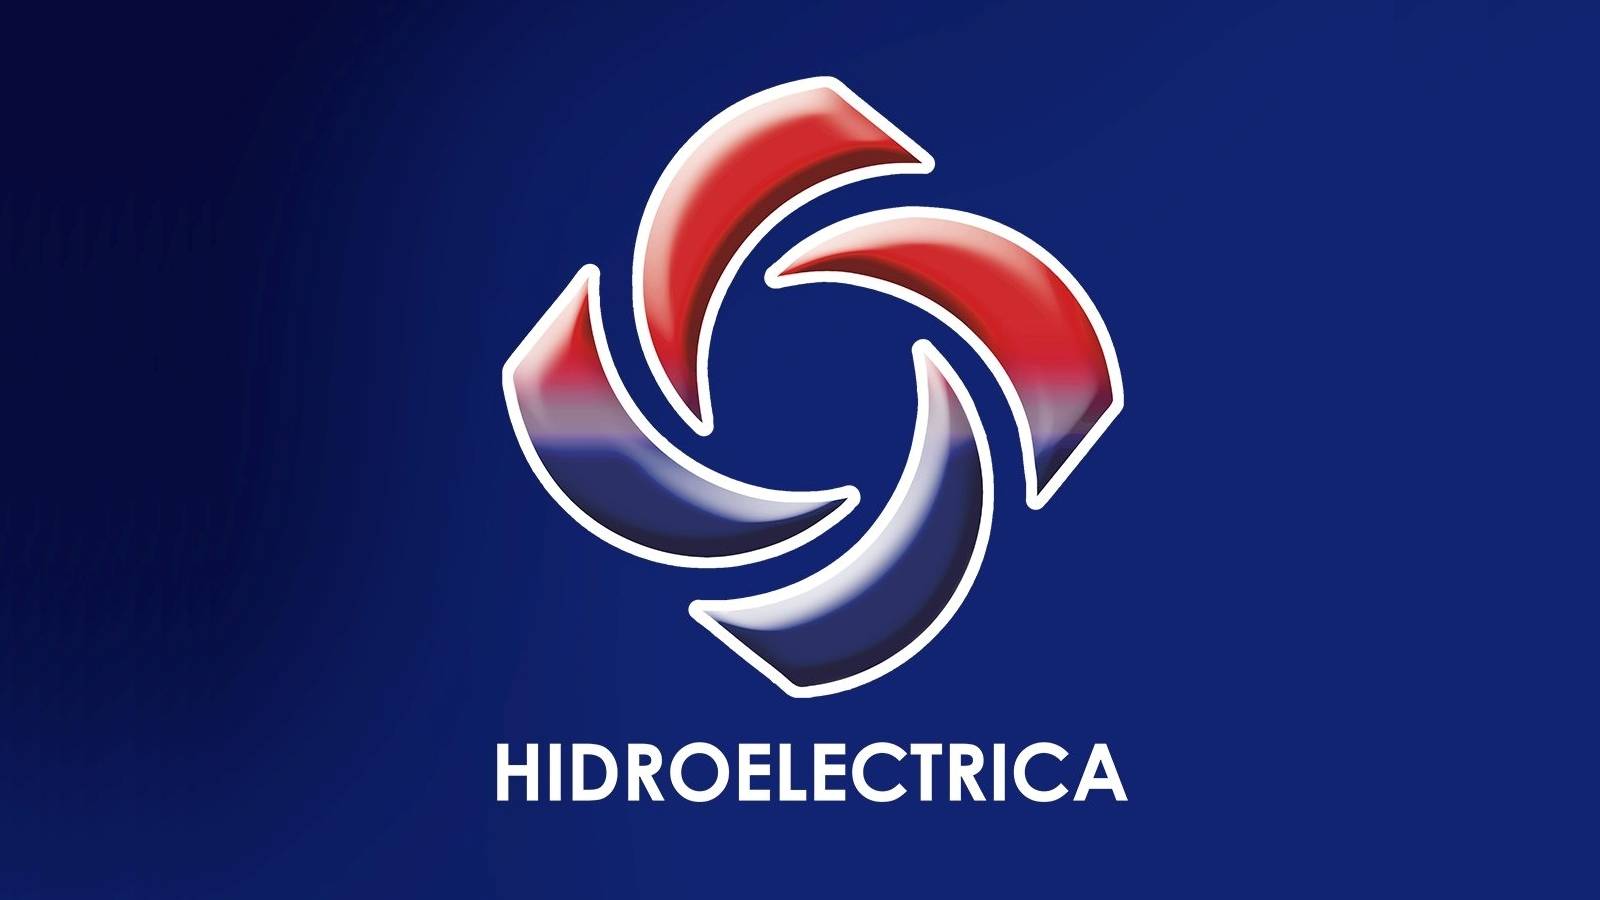 Hidroelectrica Official Measure IMPORTANT Many customers knew